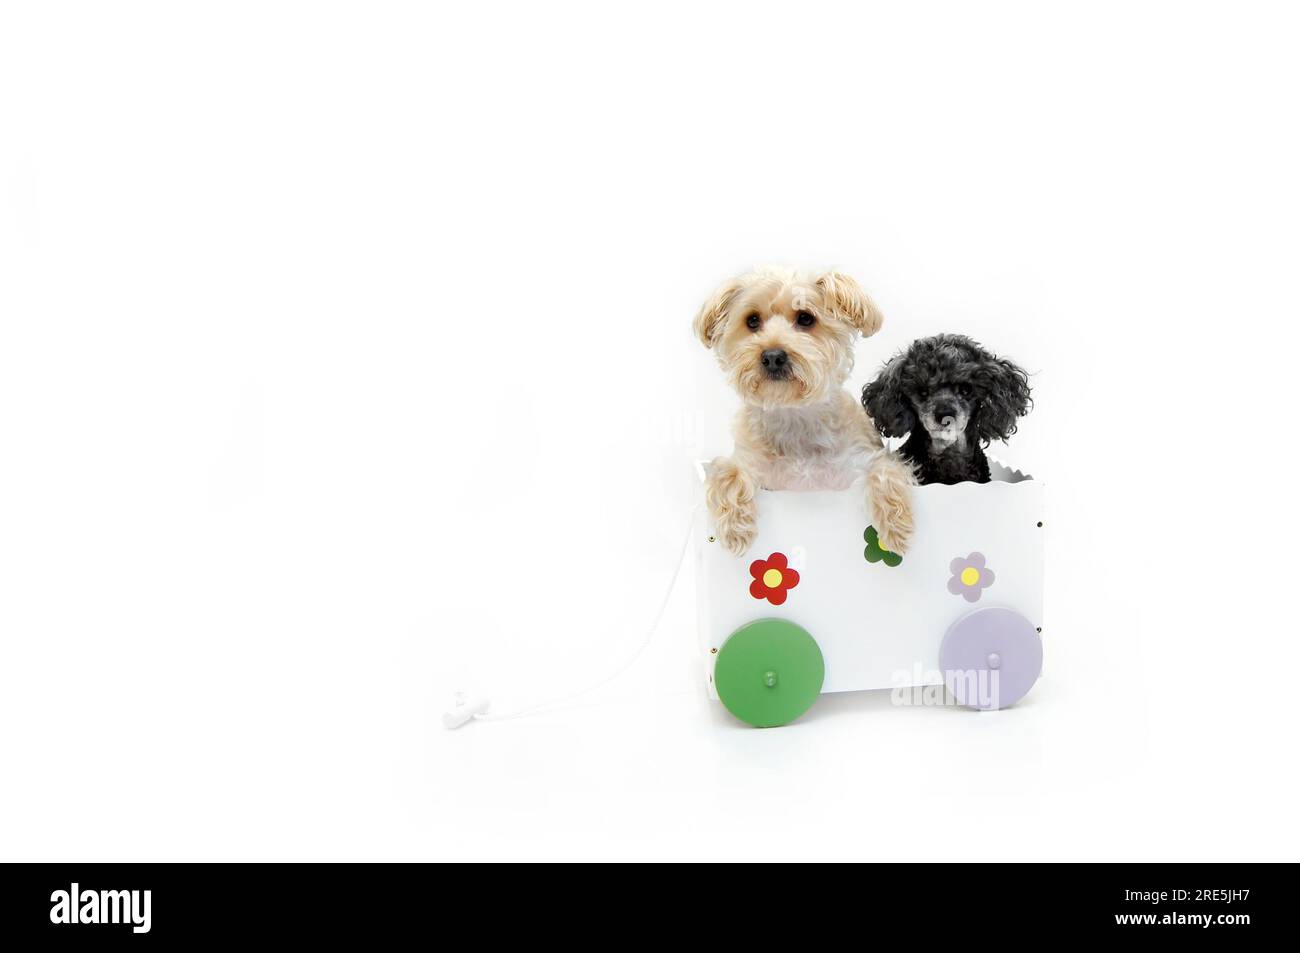 A Silky Poo and a Poodle share the space inside a white, wooden wagon.  The Silky Poo is the product of mixing a silky terrier with a poodle. Stock Photo